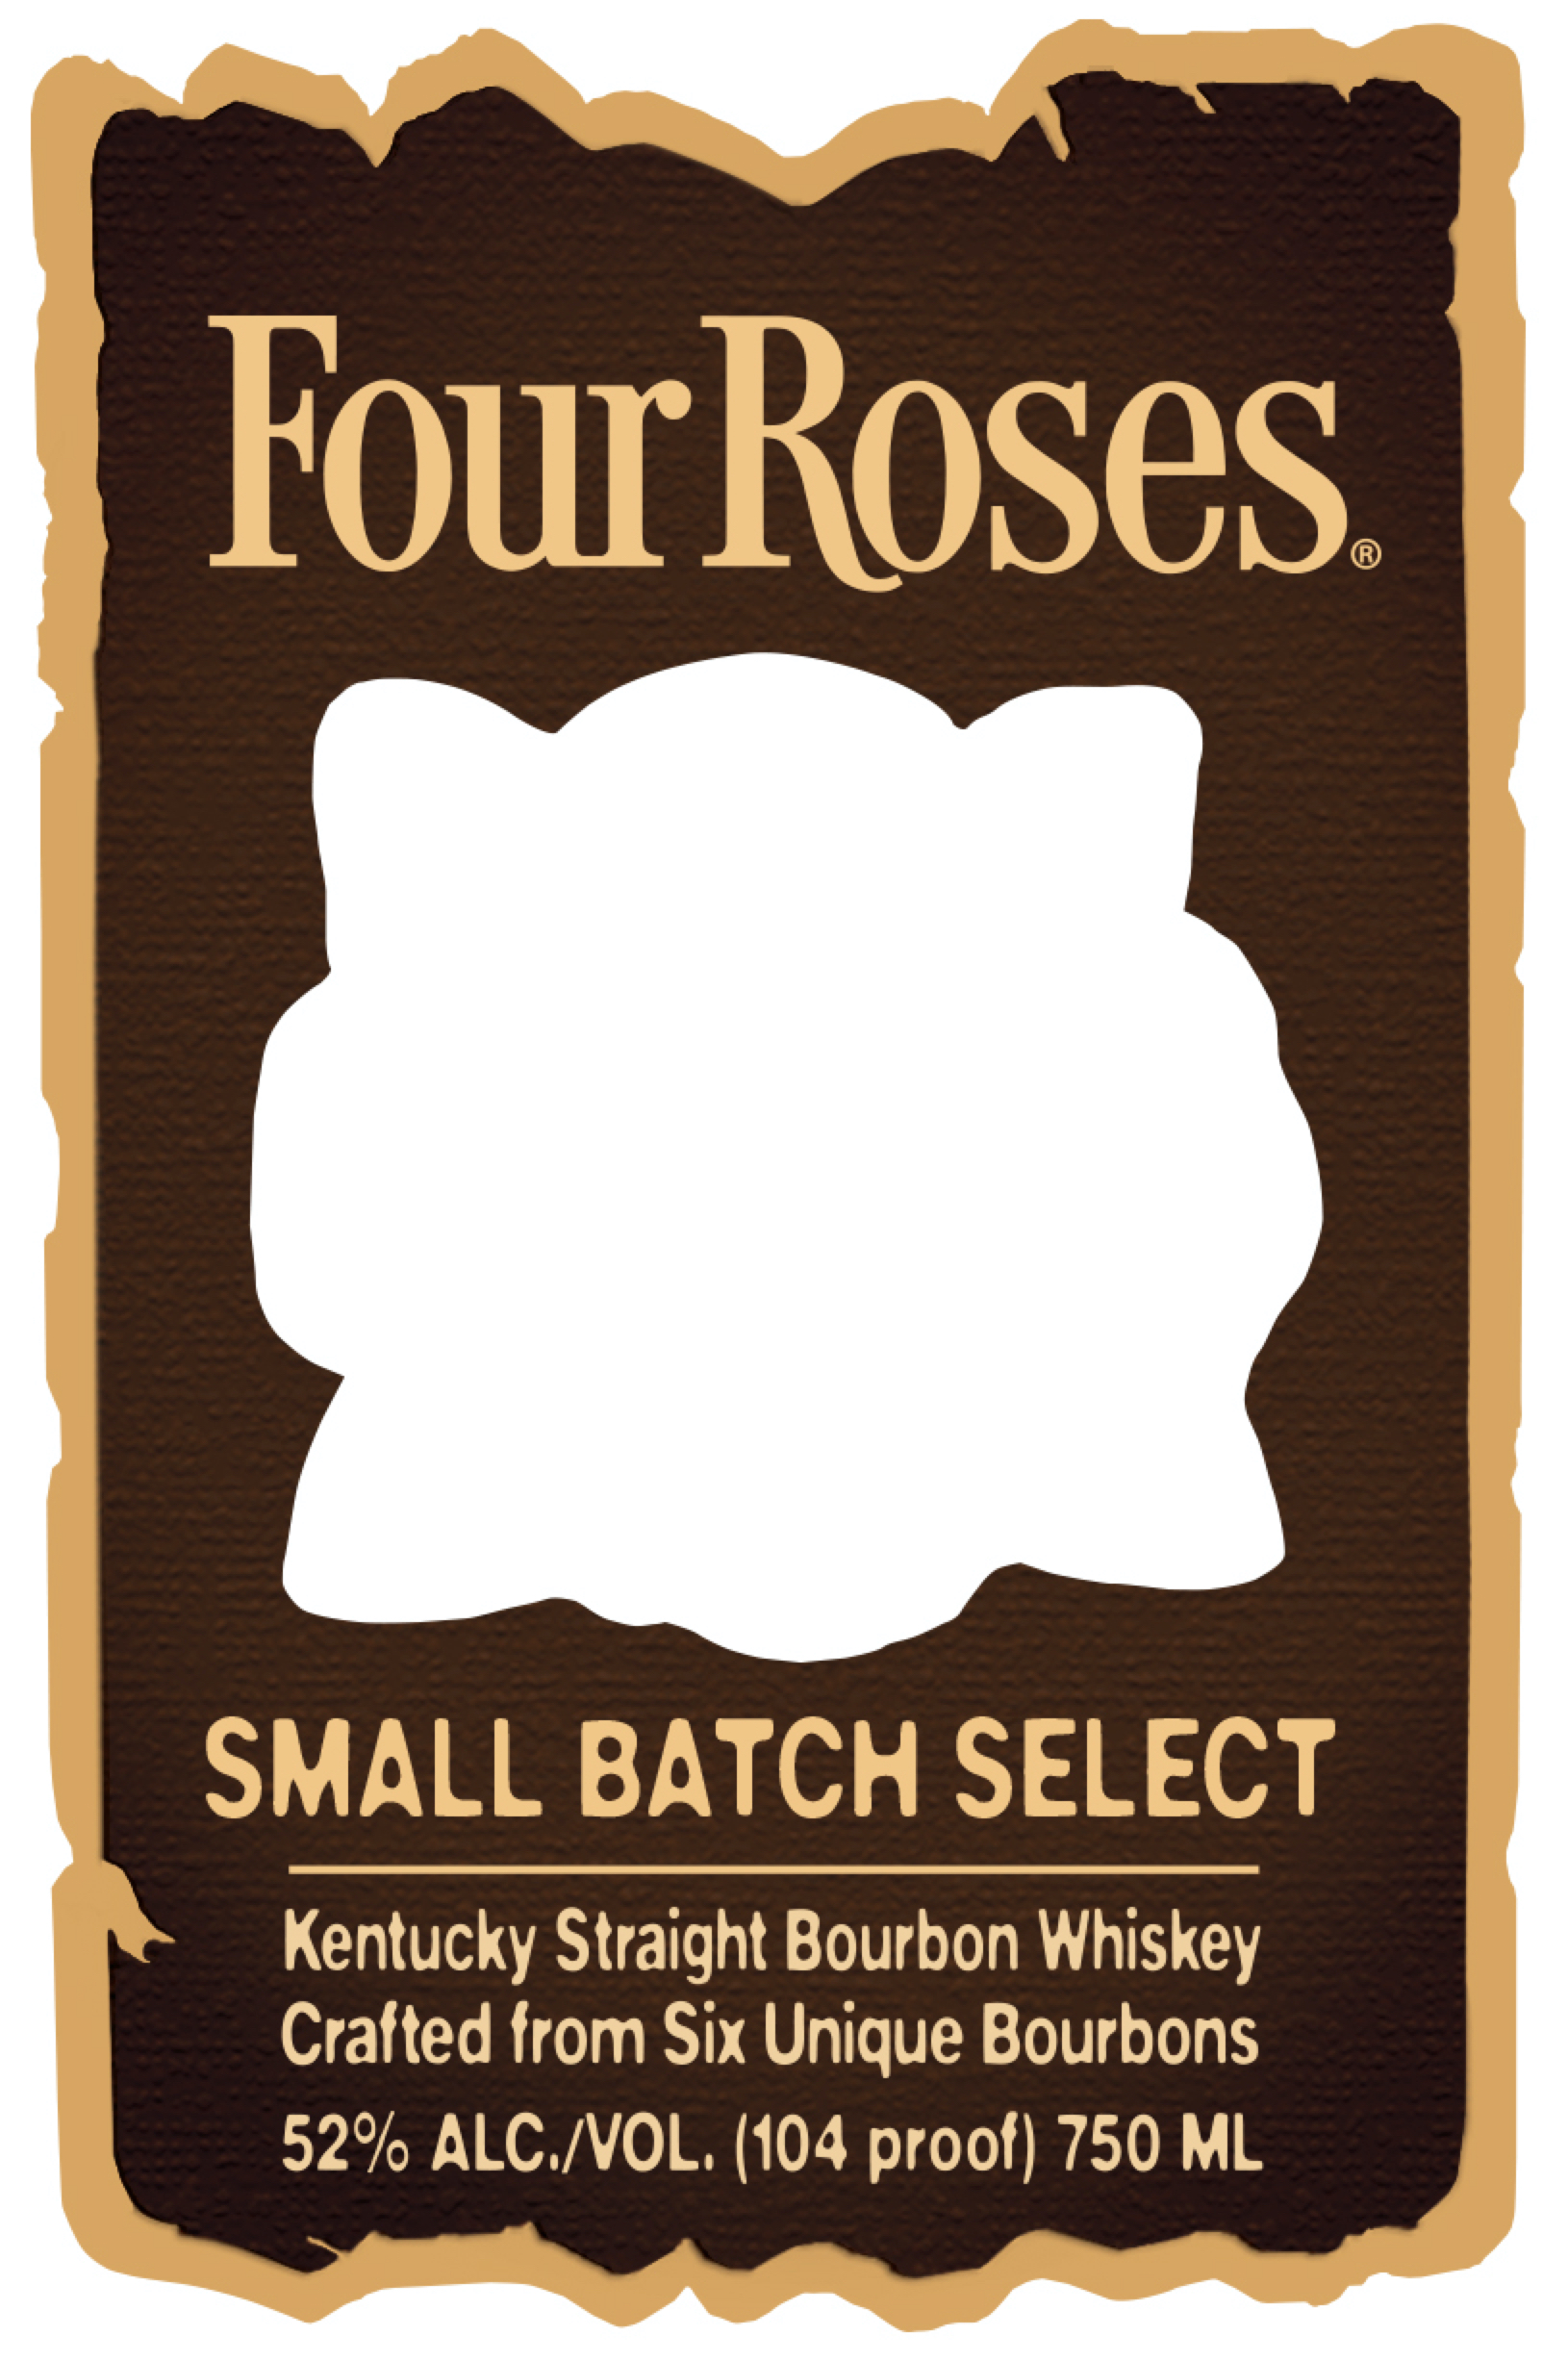 Small Batch Select Label, Front